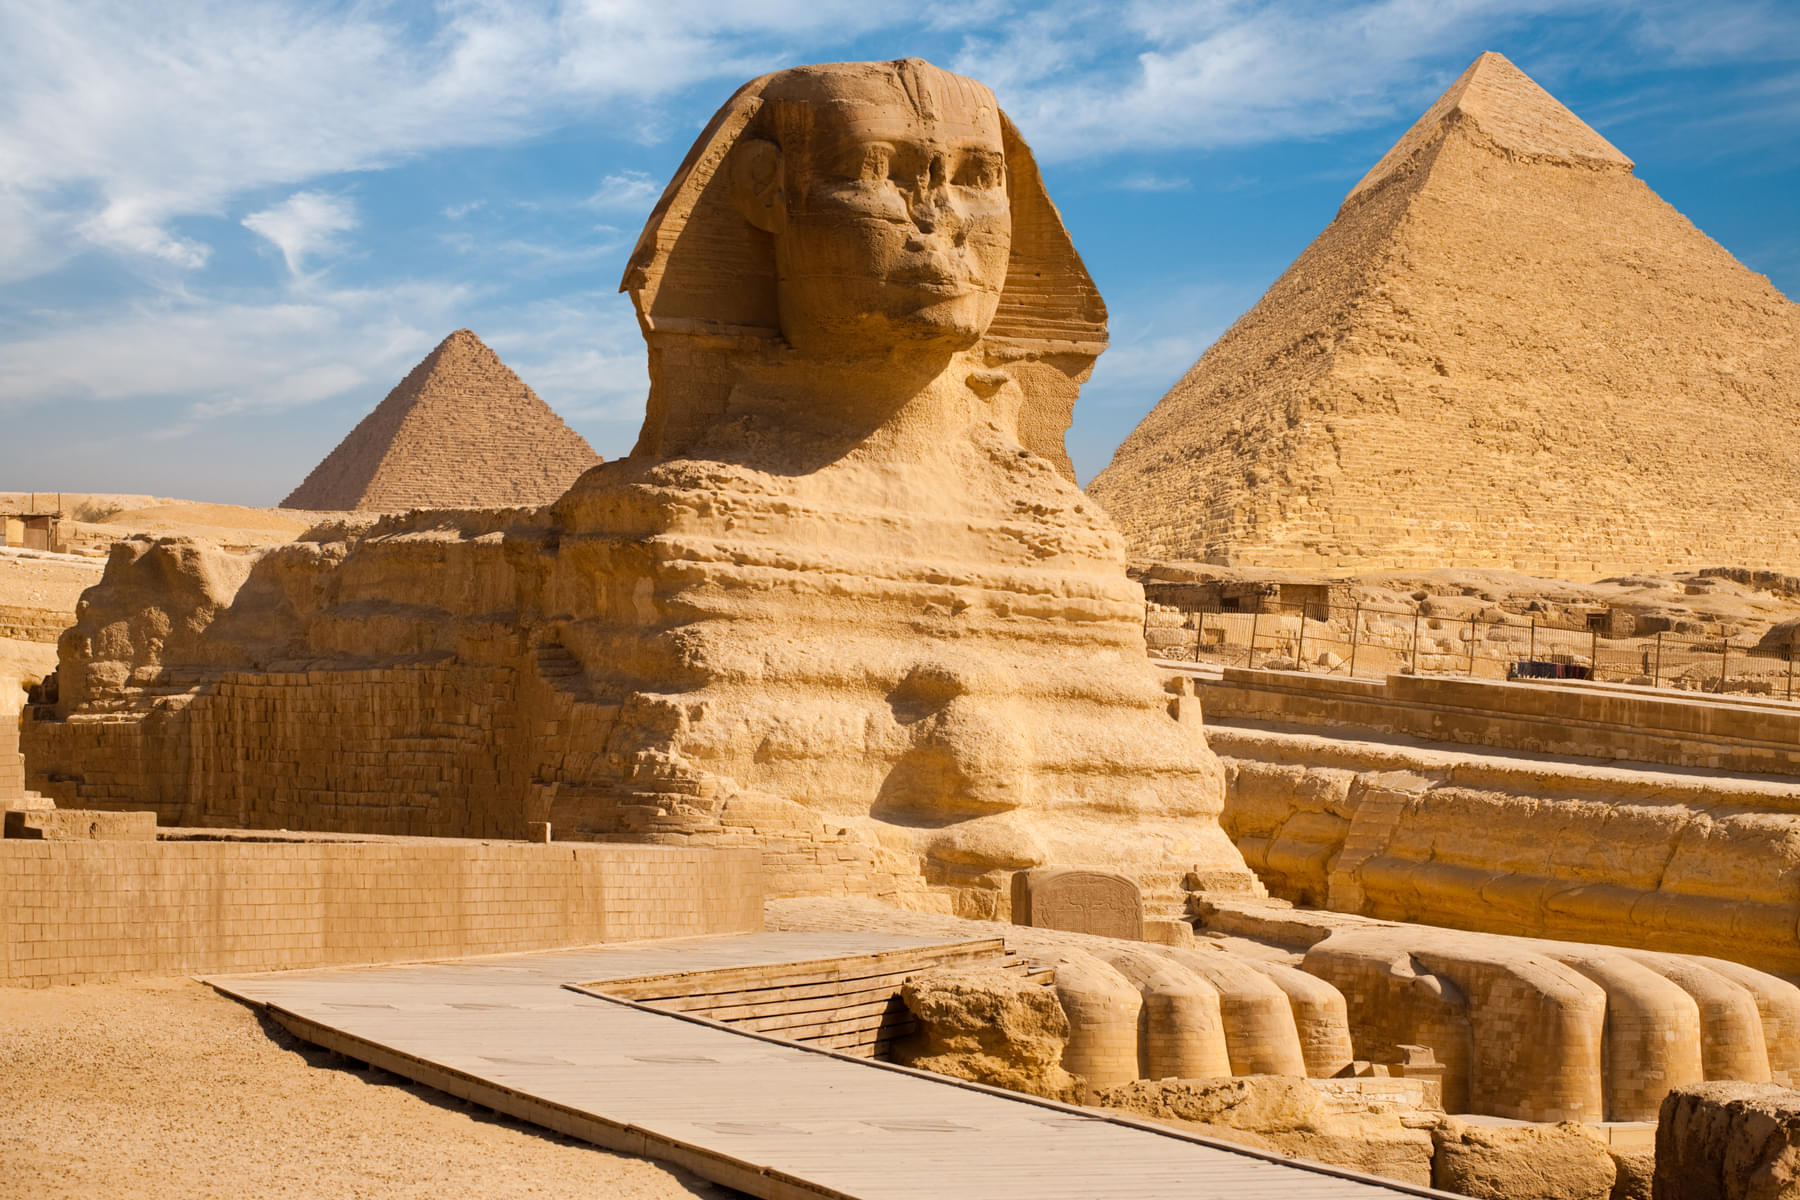 Marvel at the Sphinx of Giza,, a colossal limestone statue 